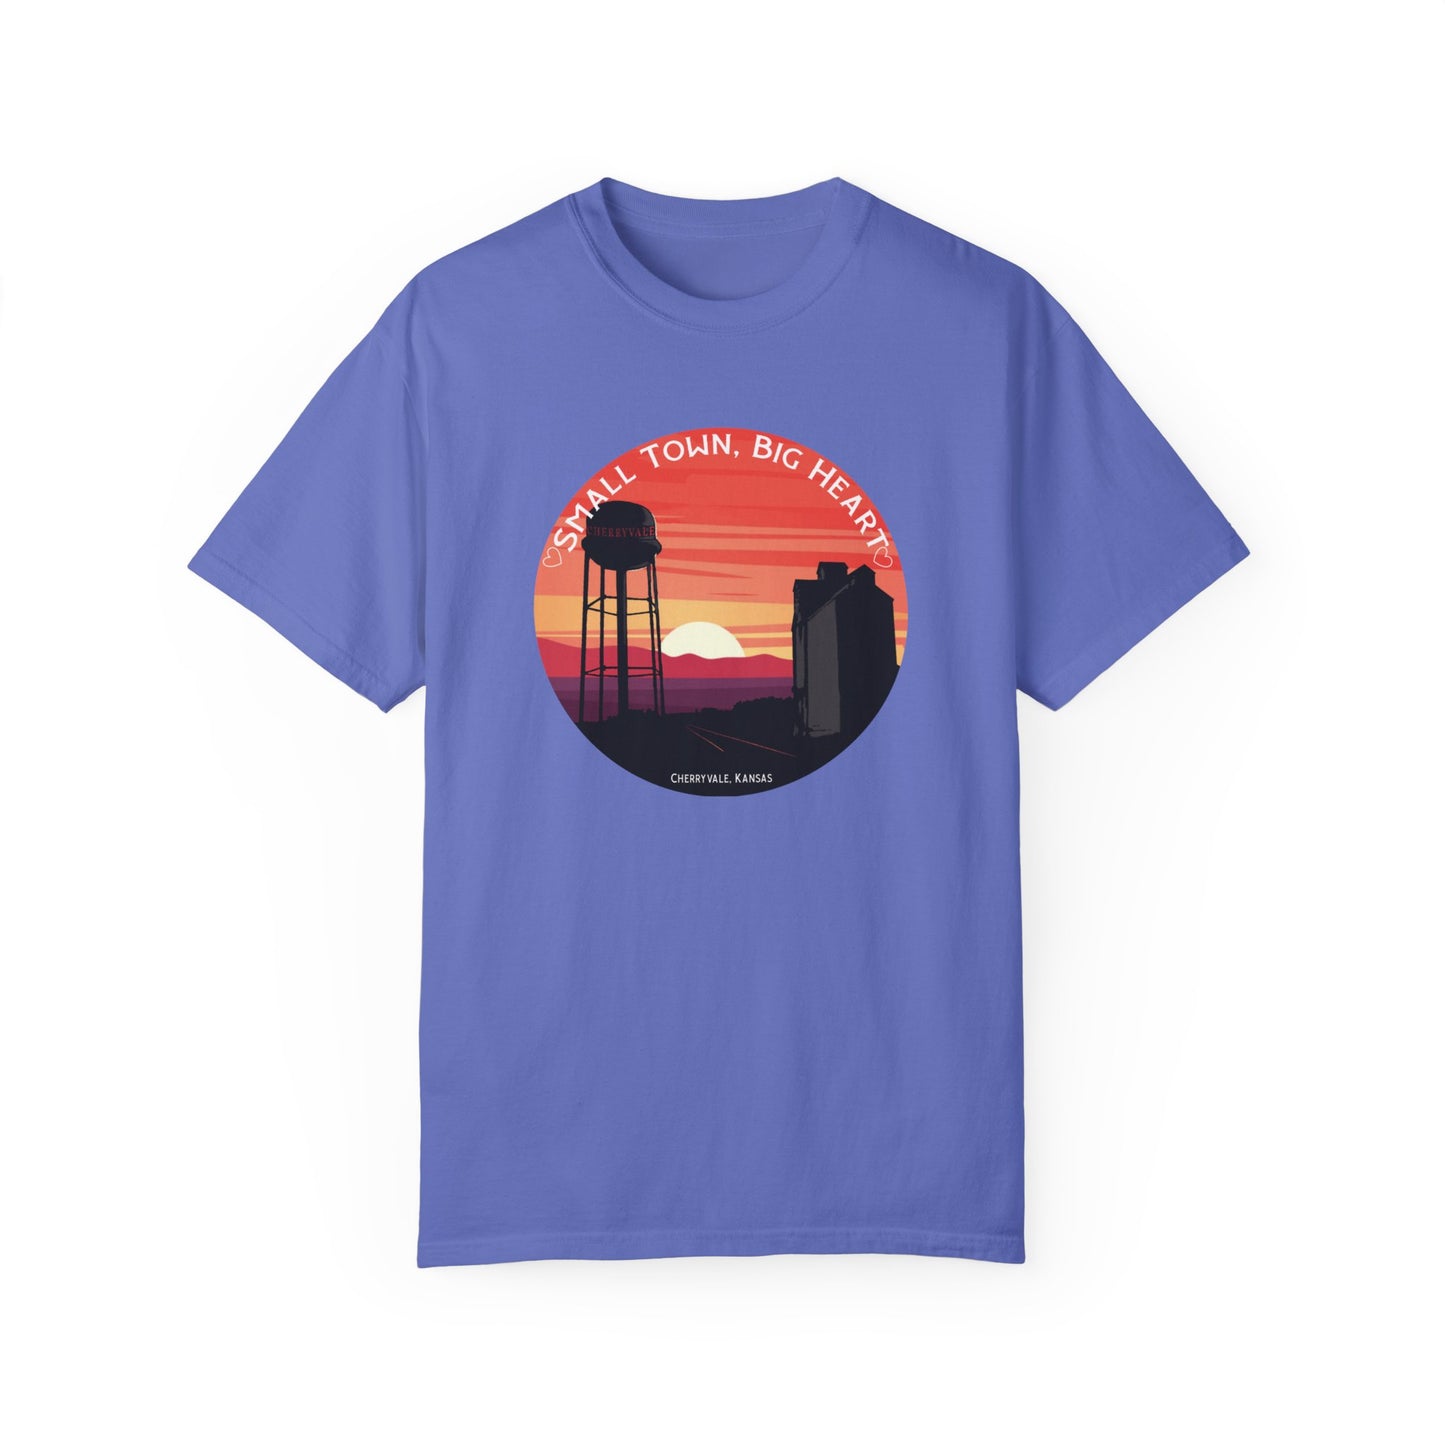 HEARTS Version - Small Town, Big Heart - Short Sleeve on Comfort Colors